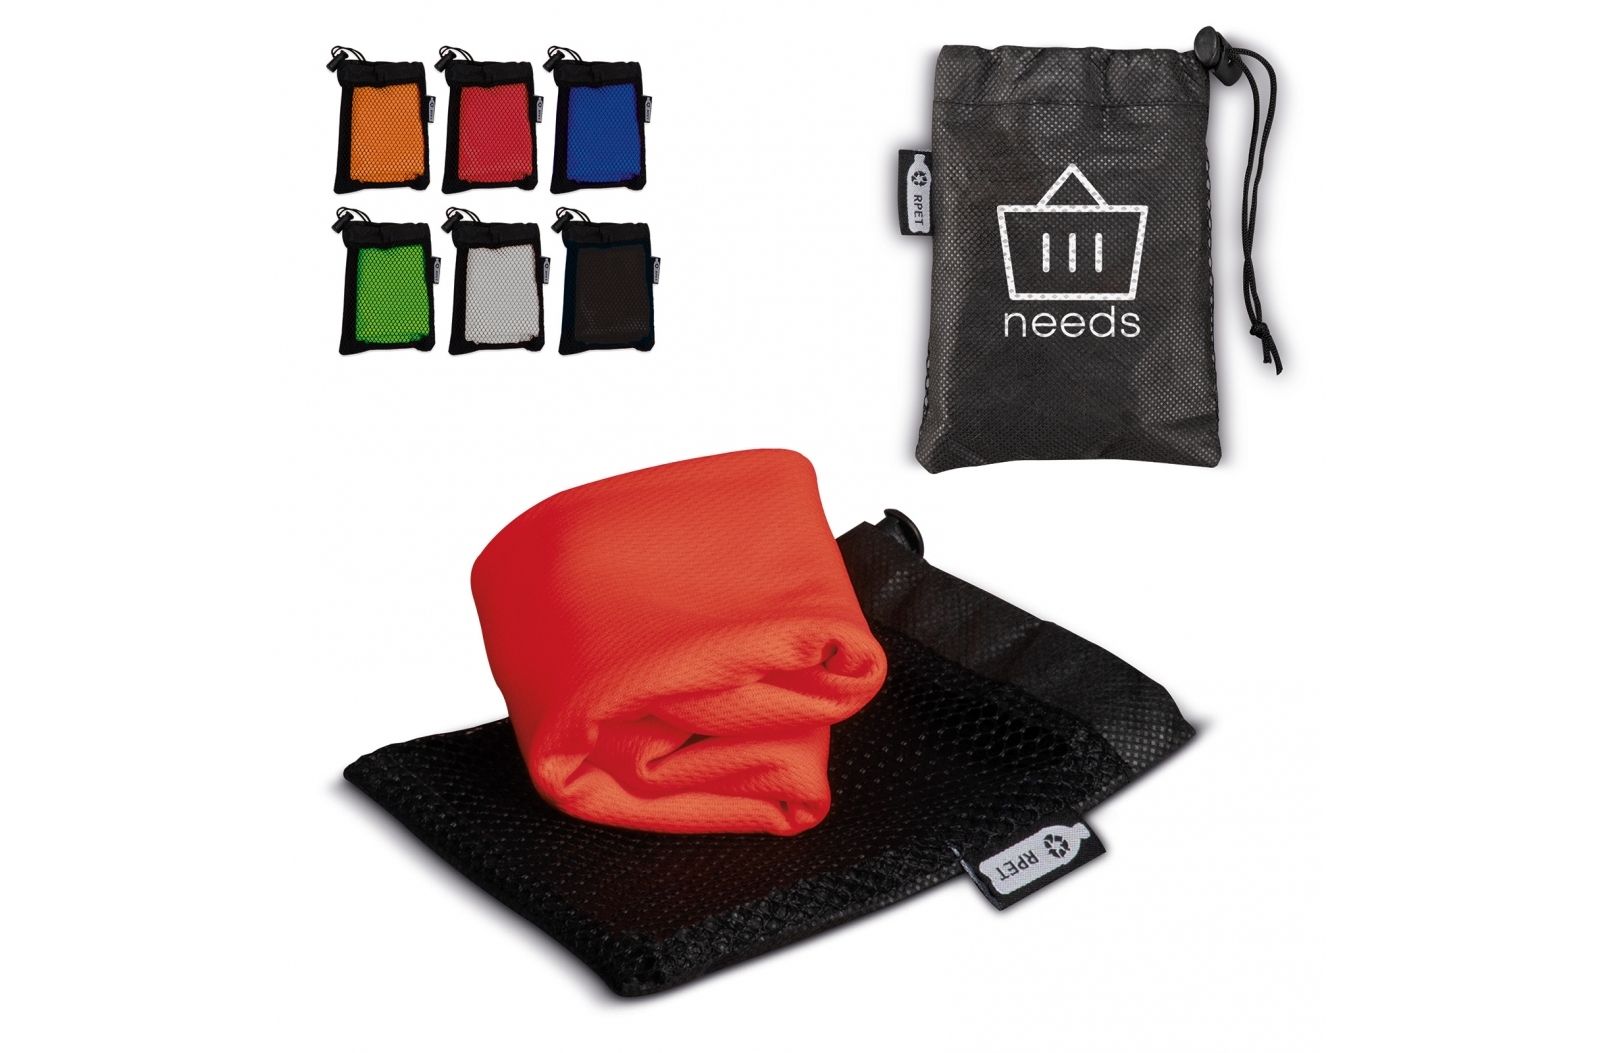 Sports cooling towel with pouch that is sustainable - Livingston